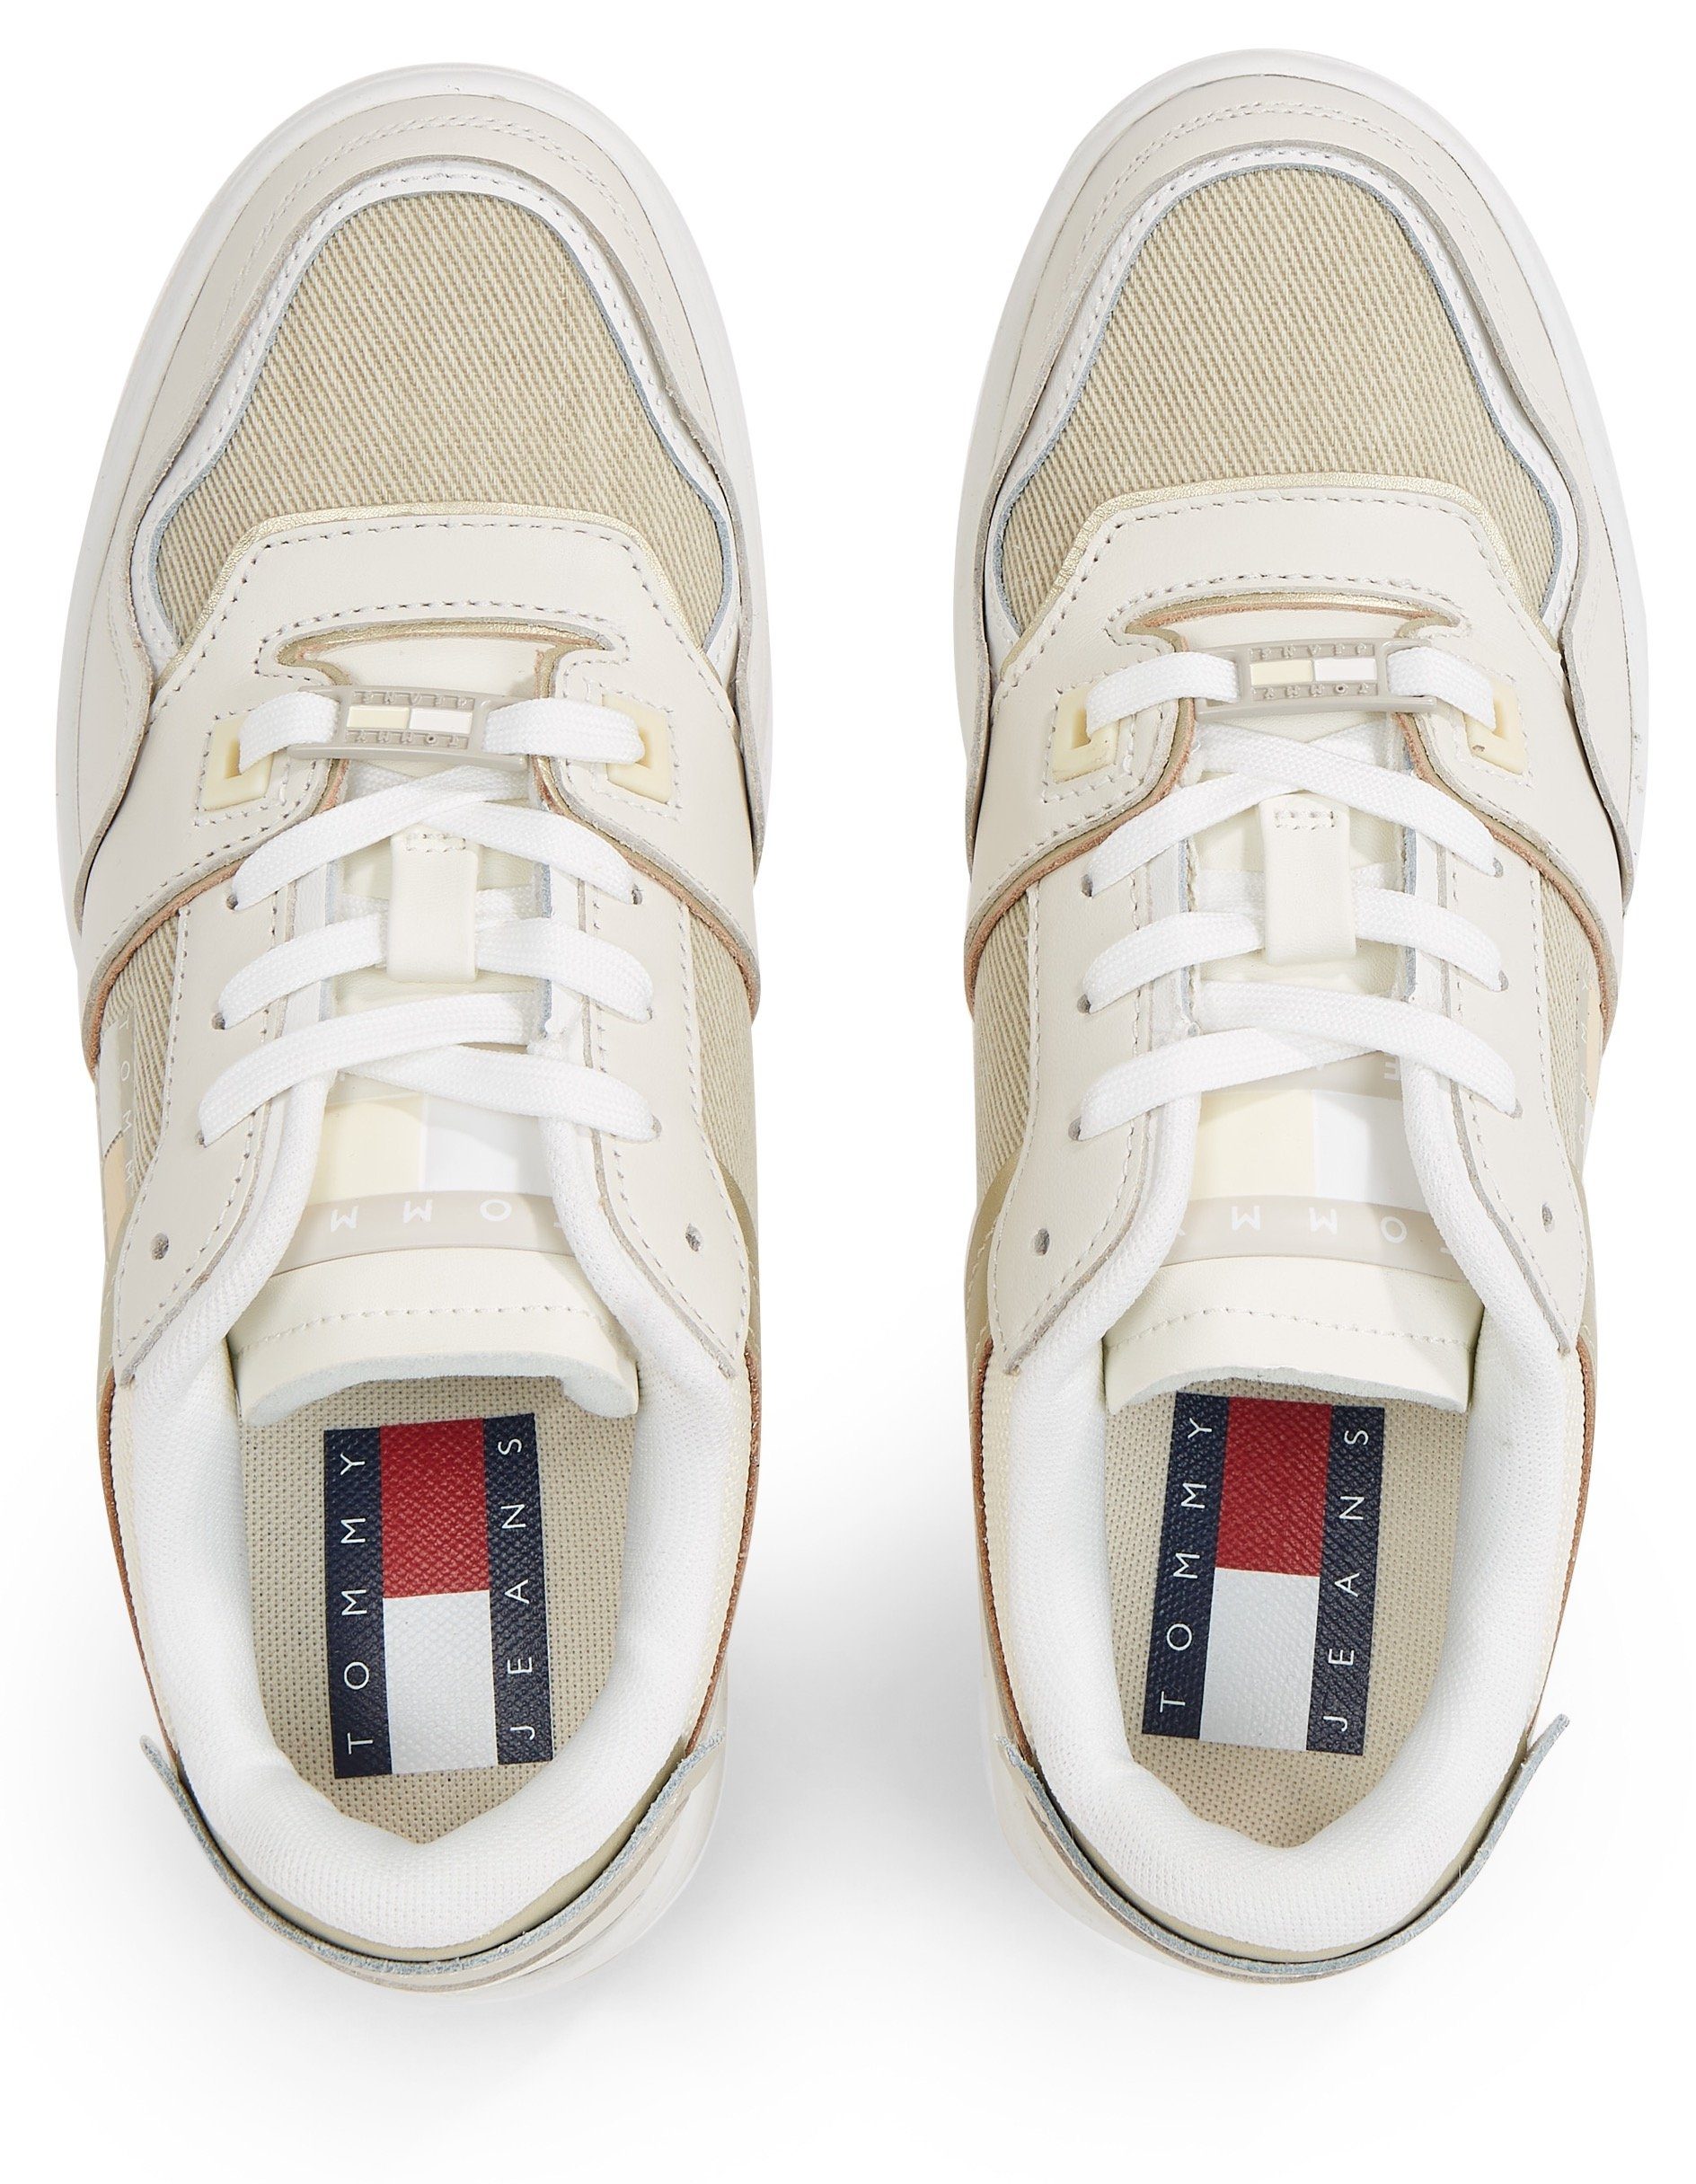 Tommy Jeans TJW RETRO BASKET MIX MATERIAL Basket-Style Keilsneaker LC im